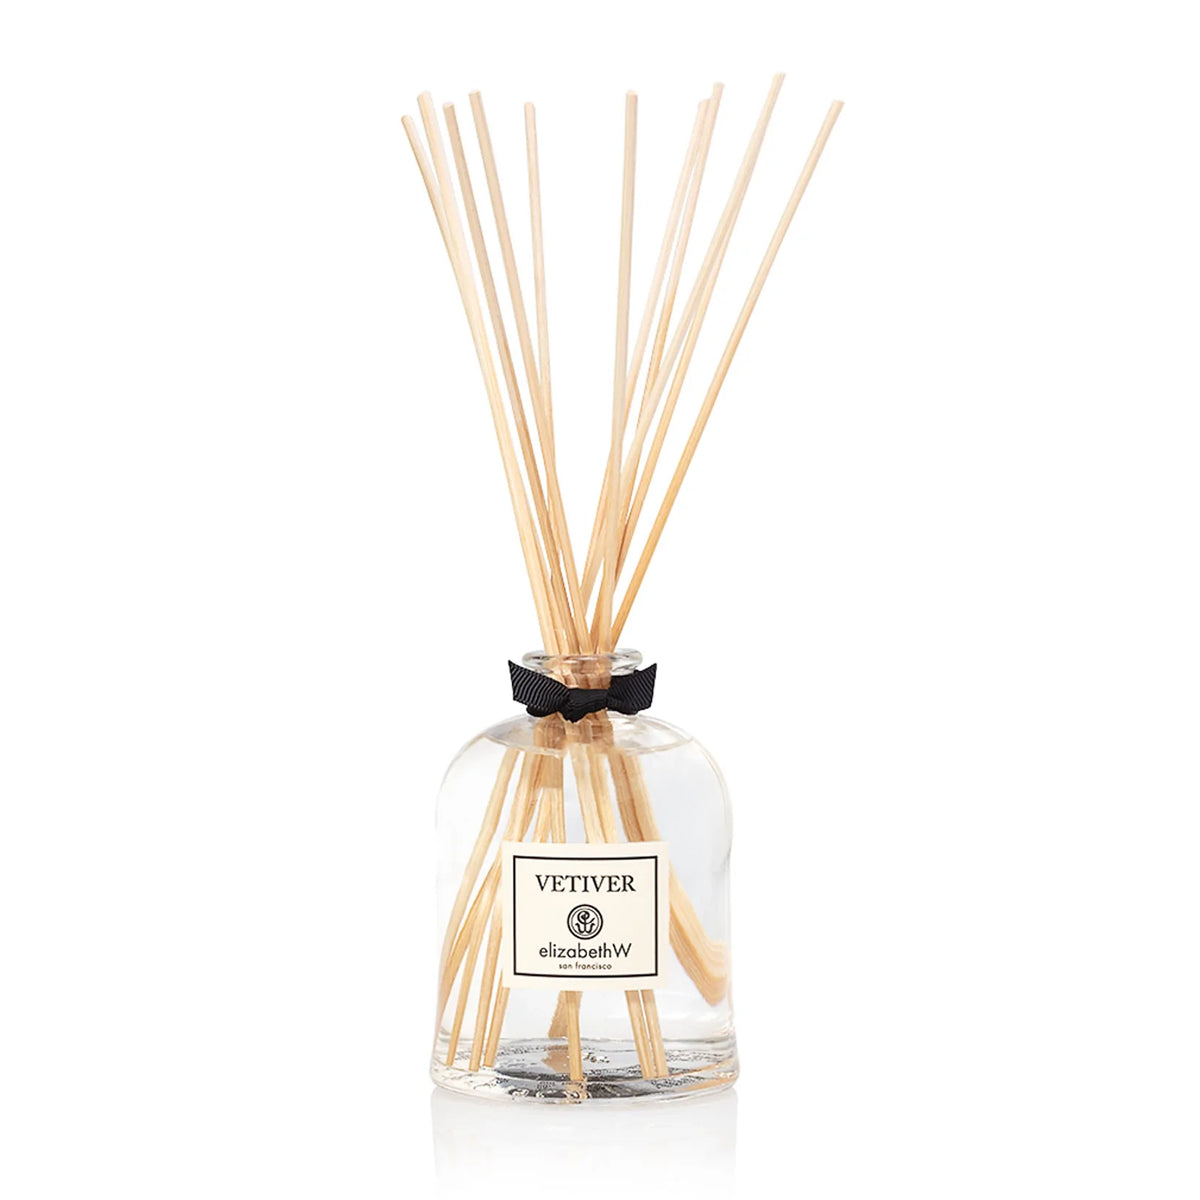 An Italian glass diffuser bottle labeled "elizabeth W Signature Vetiver Diffuser" with several light brown reed sticks inserted, and a decorative black bow tied around the neck, against a white background.